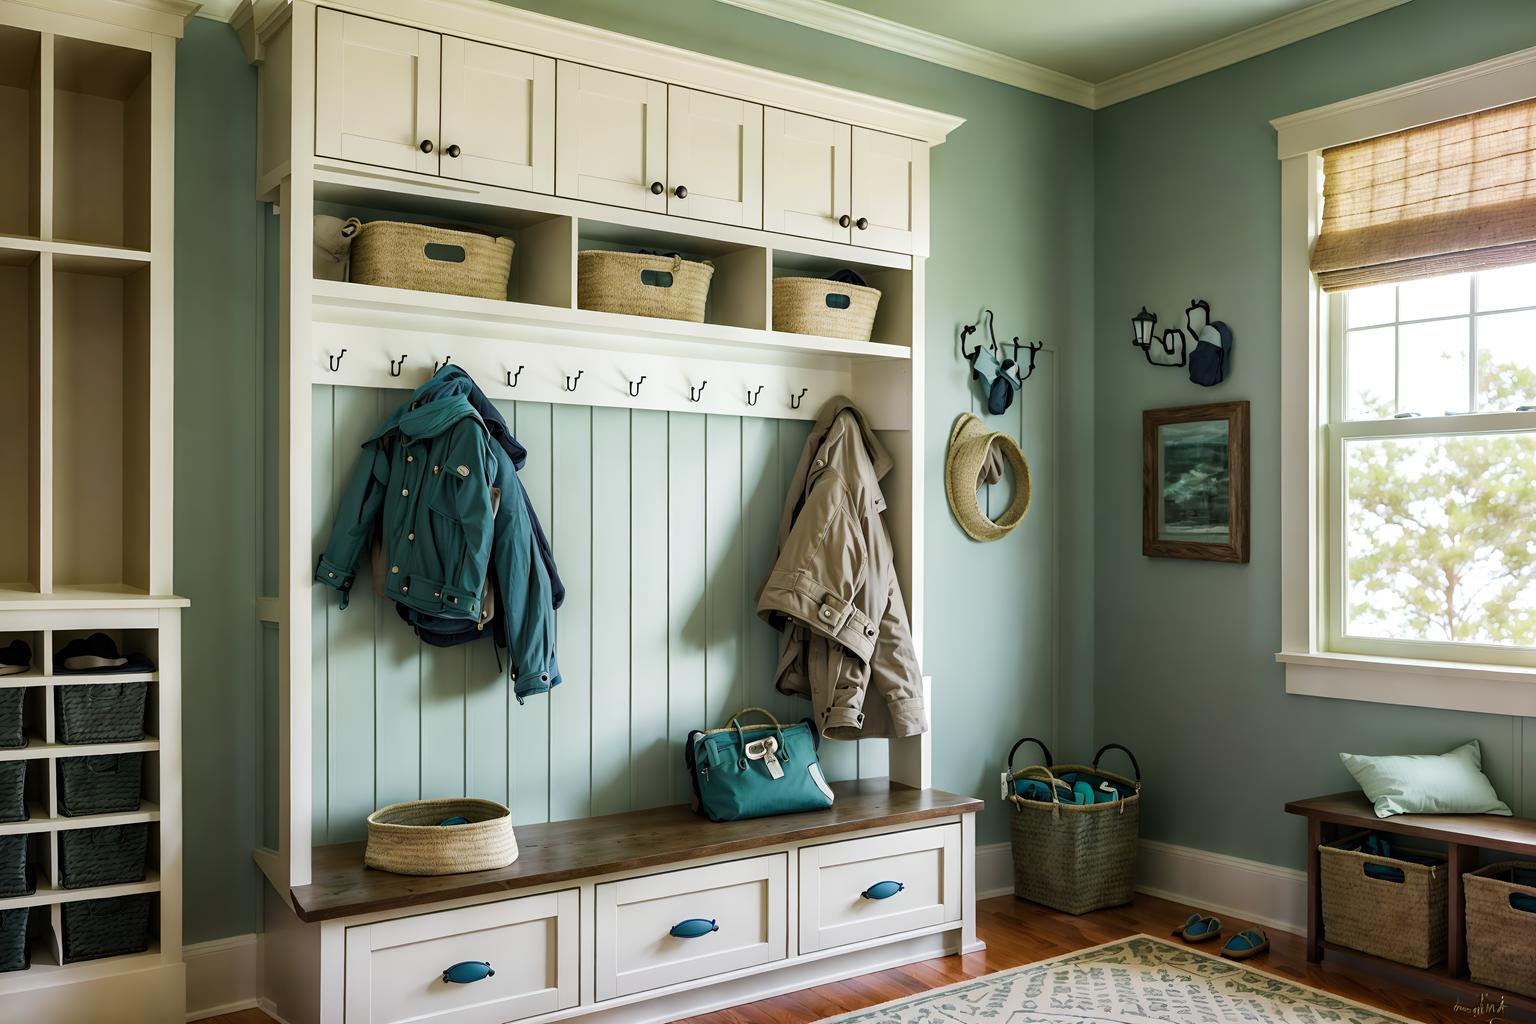 Coastal-style Mudroom Interior With Wall Hooks For Coats And